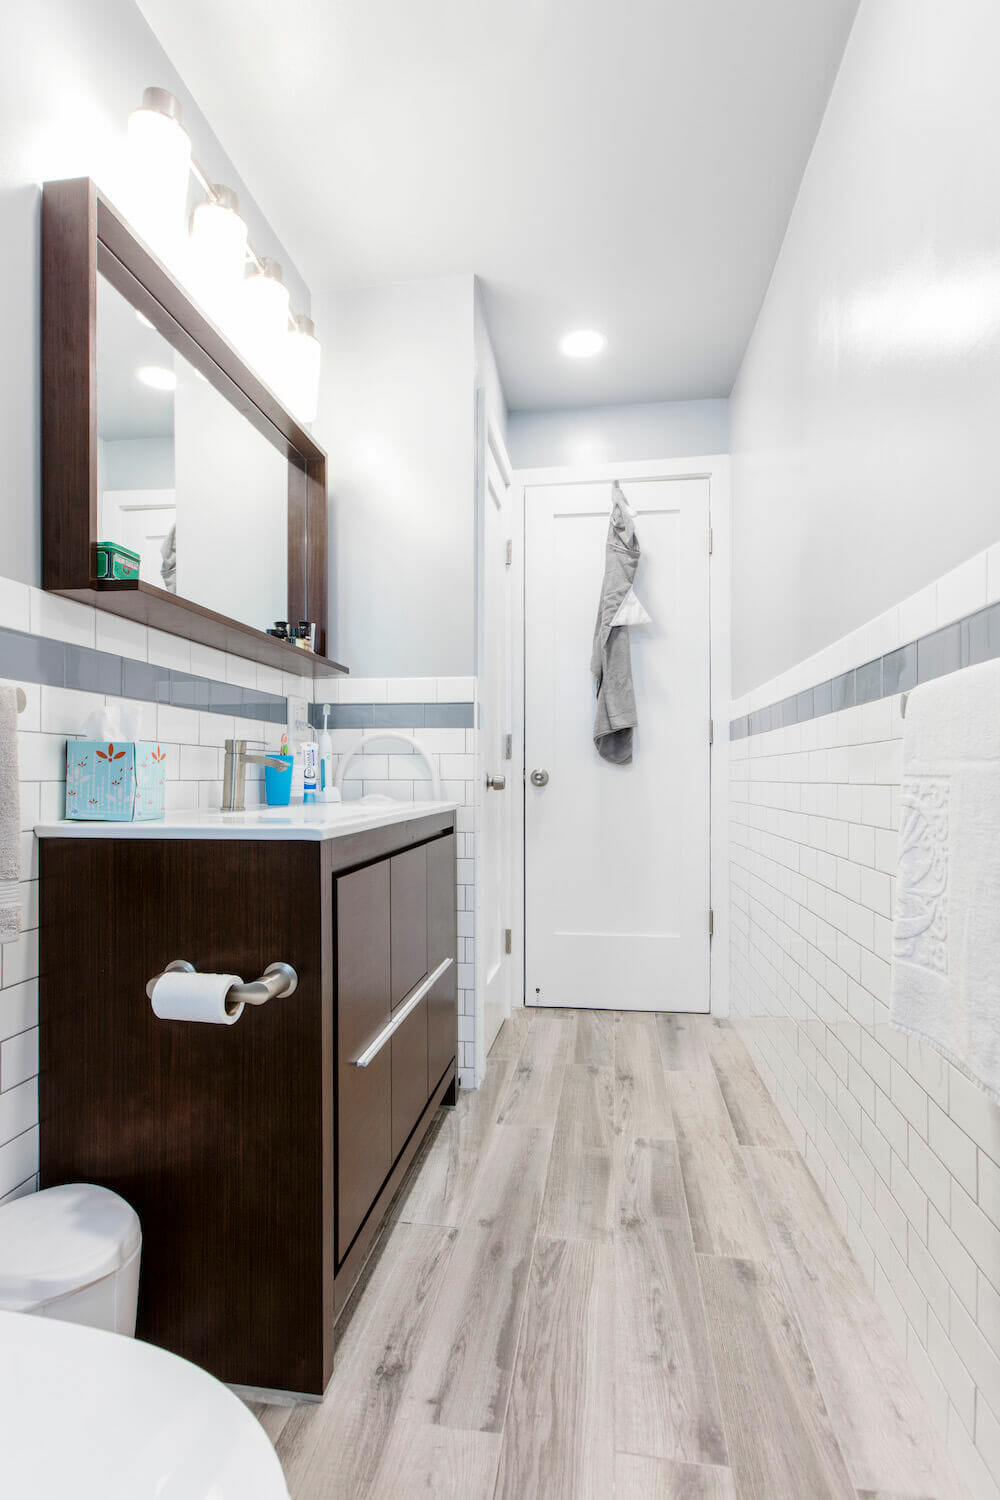 White subway tiles with light blue trim and white sink over brown vanity after renovation